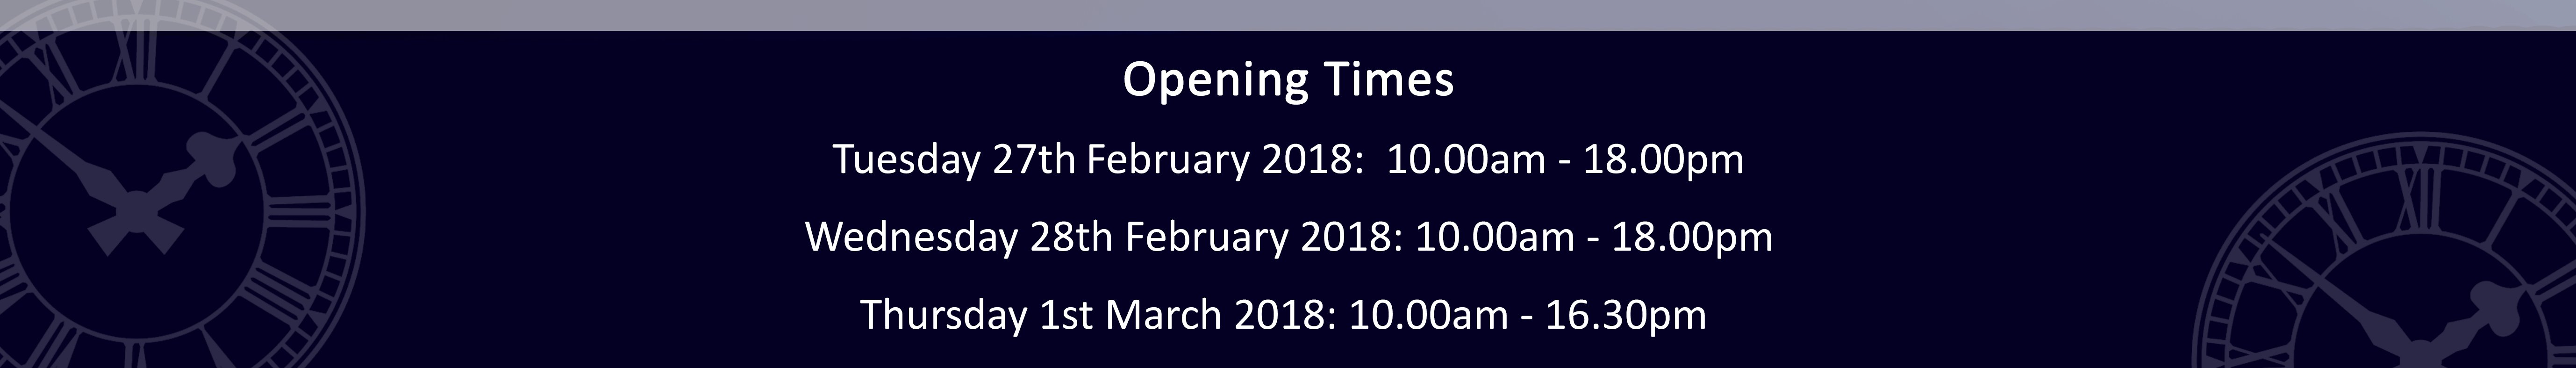 Plan Your Visit To BVE 2018_Opening Times